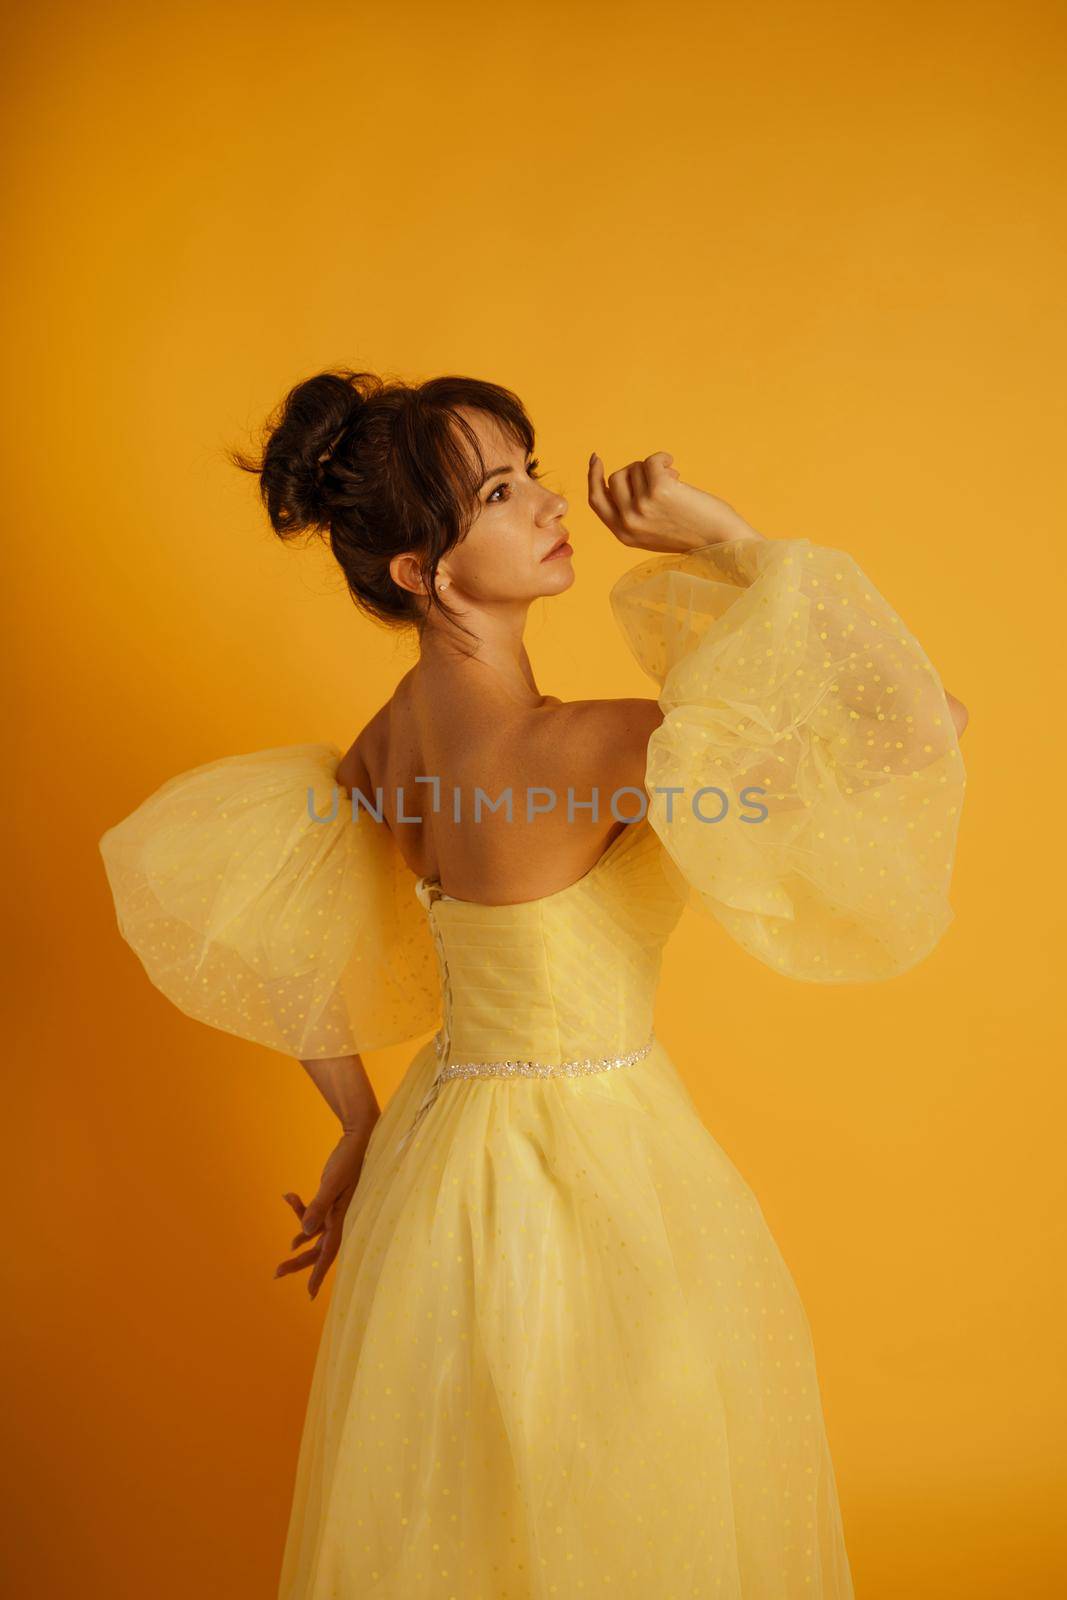 Portrait of a beautiful middle-aged woman in a yellow dress, her hair pulled up against a yellow background by Matiunina